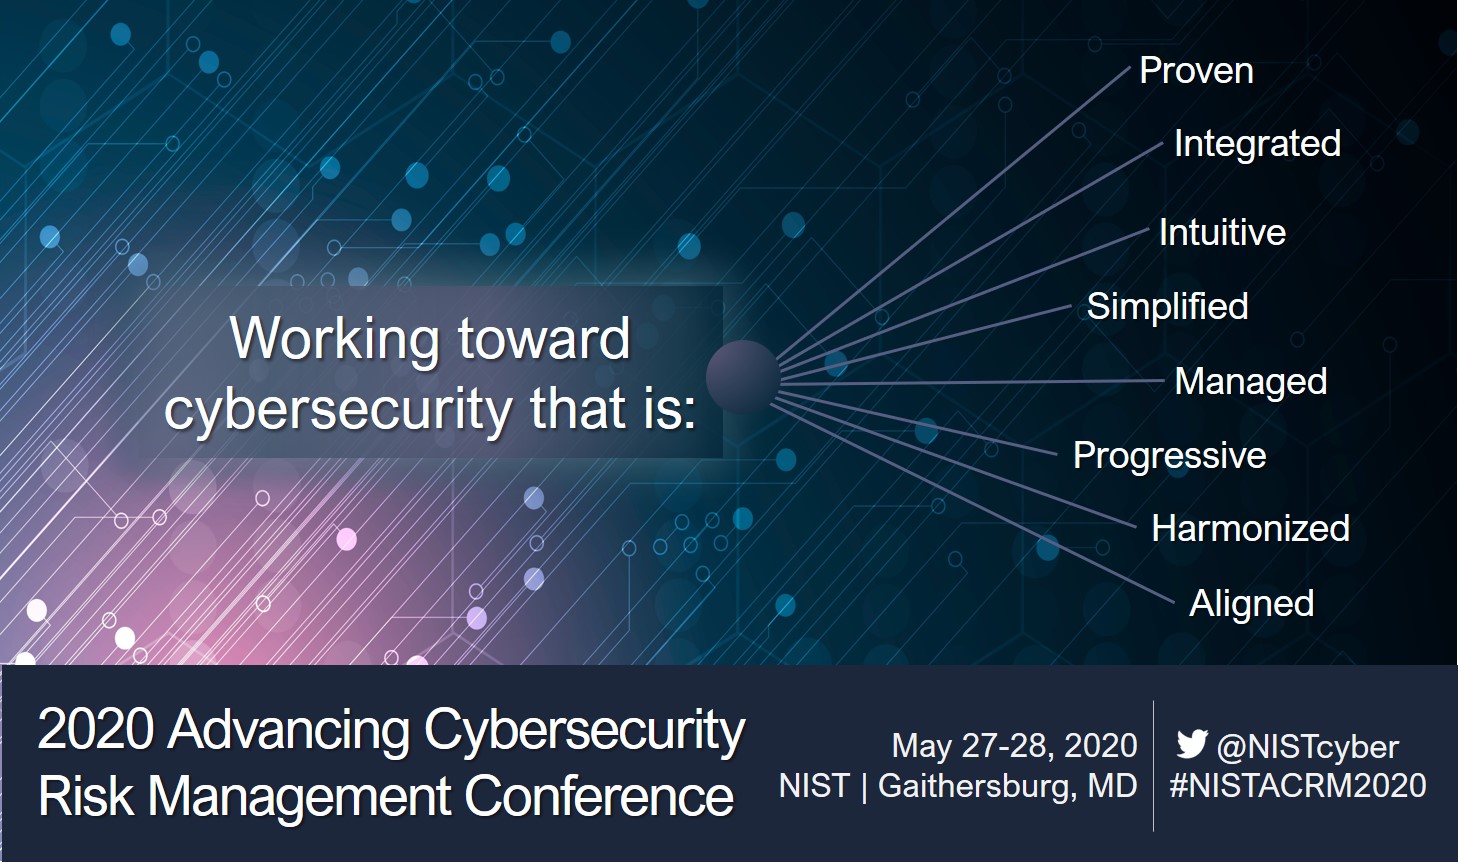 2020 Advancing Cybersecurity Risk Management Conference